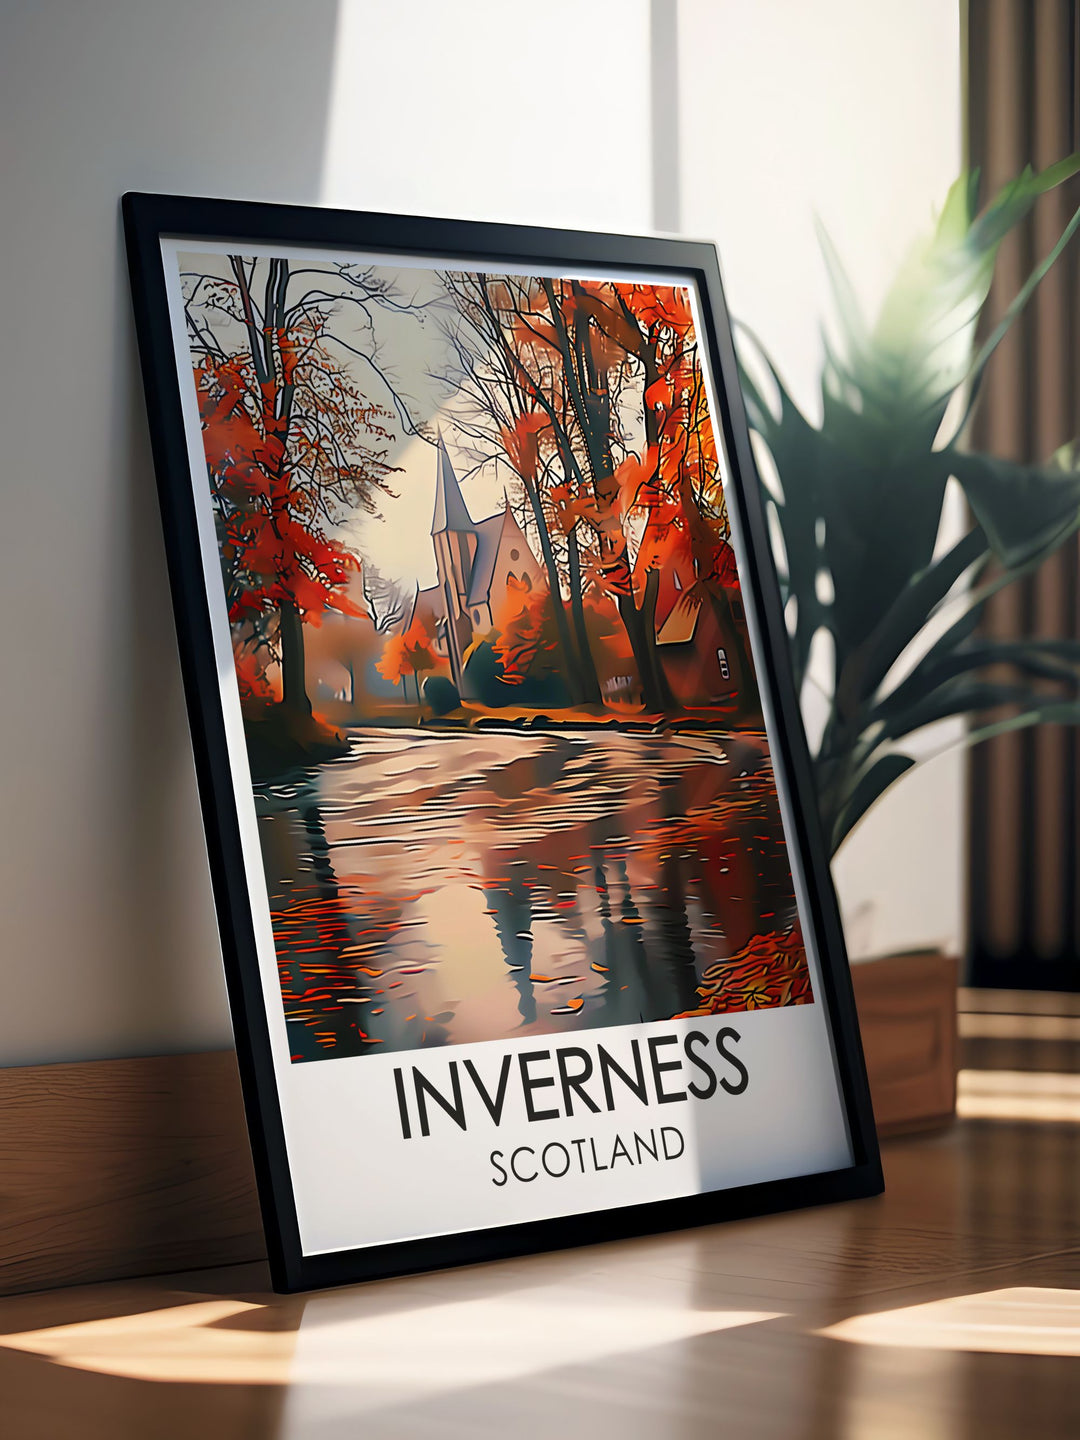 Gallery wall art featuring the Old Church in Inverness, illustrating its historical significance and timeless beauty against the backdrop of the Scottish Highlands.